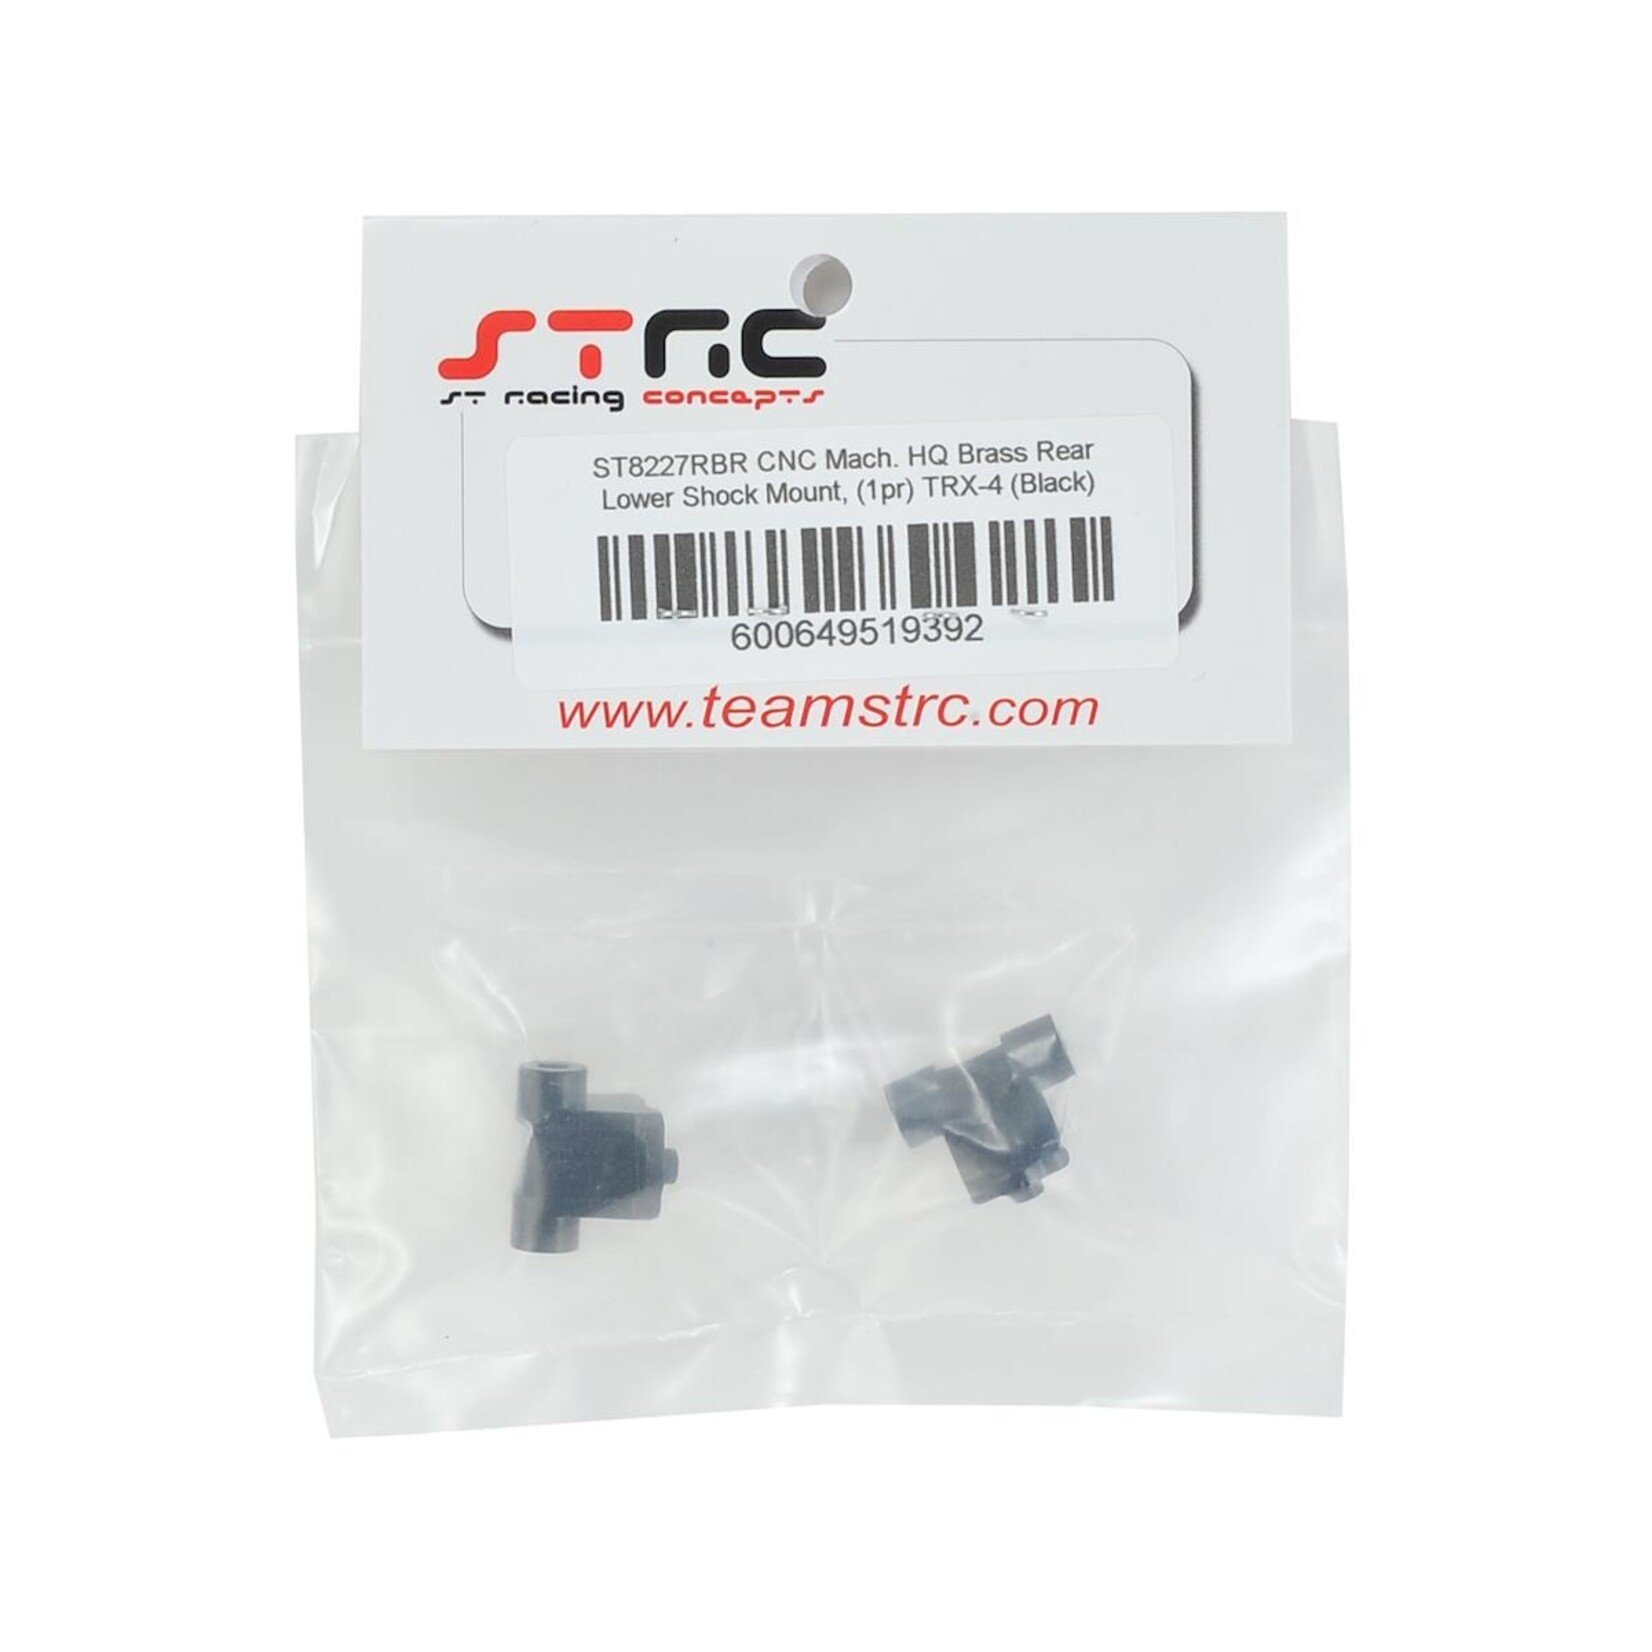 ST Racing Concepts ST Racing Concepts Traxxas TRX-4 Brass Rear Lower Shock Mounts (Black) #ST8227RBR